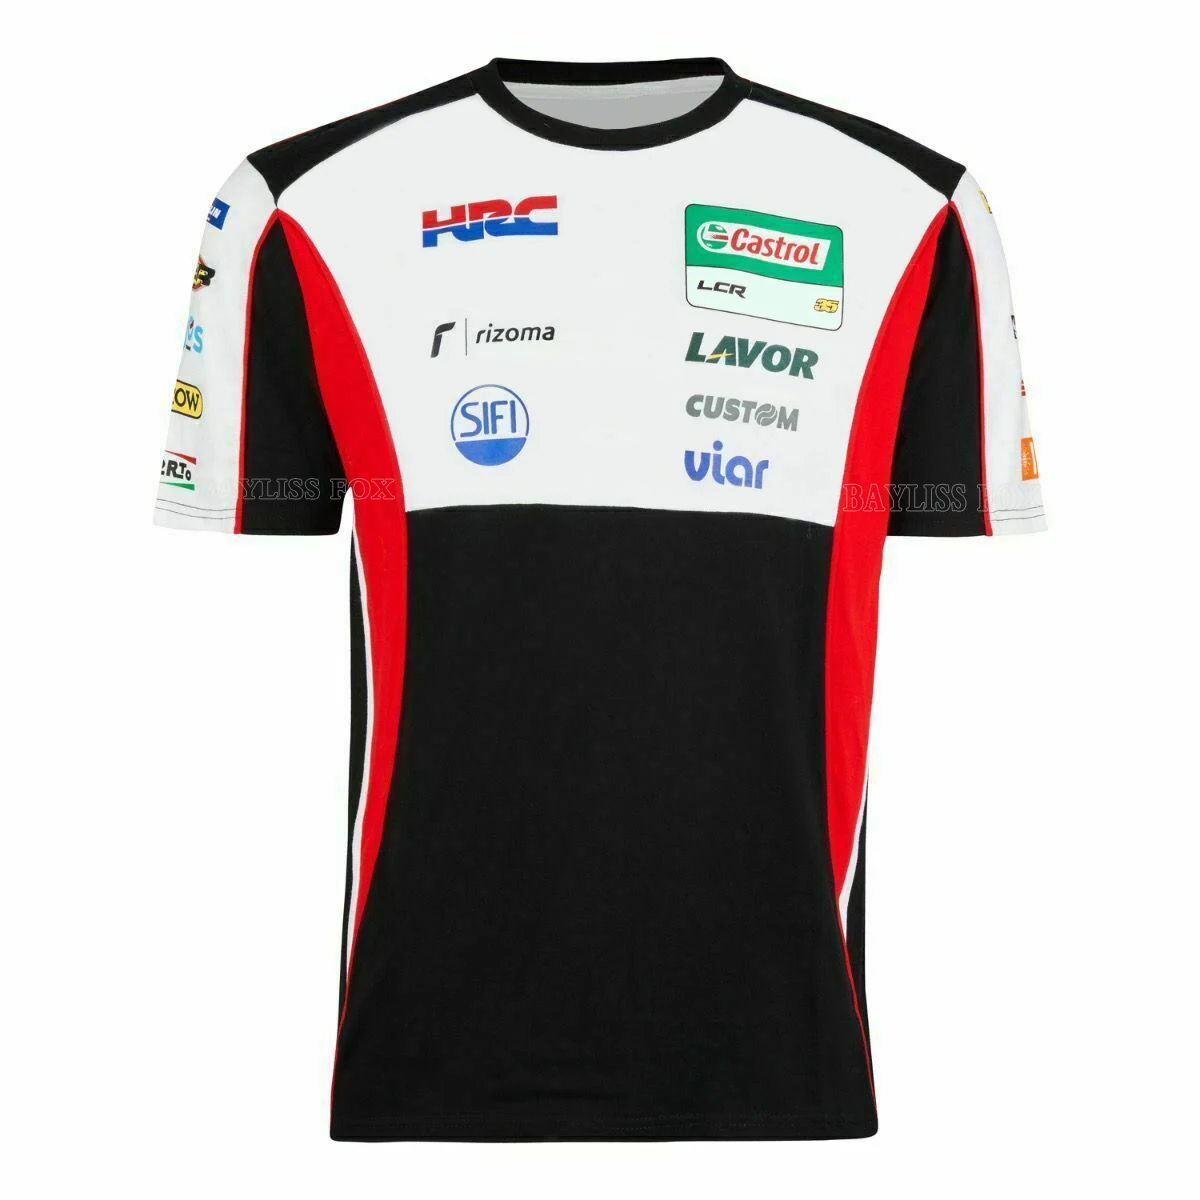 For Honda LCR HRC Factory Racing Team 2021 Moto Motorcycle Superbike T-Shirt Men's Short Quick Dry Breathable Jerseys